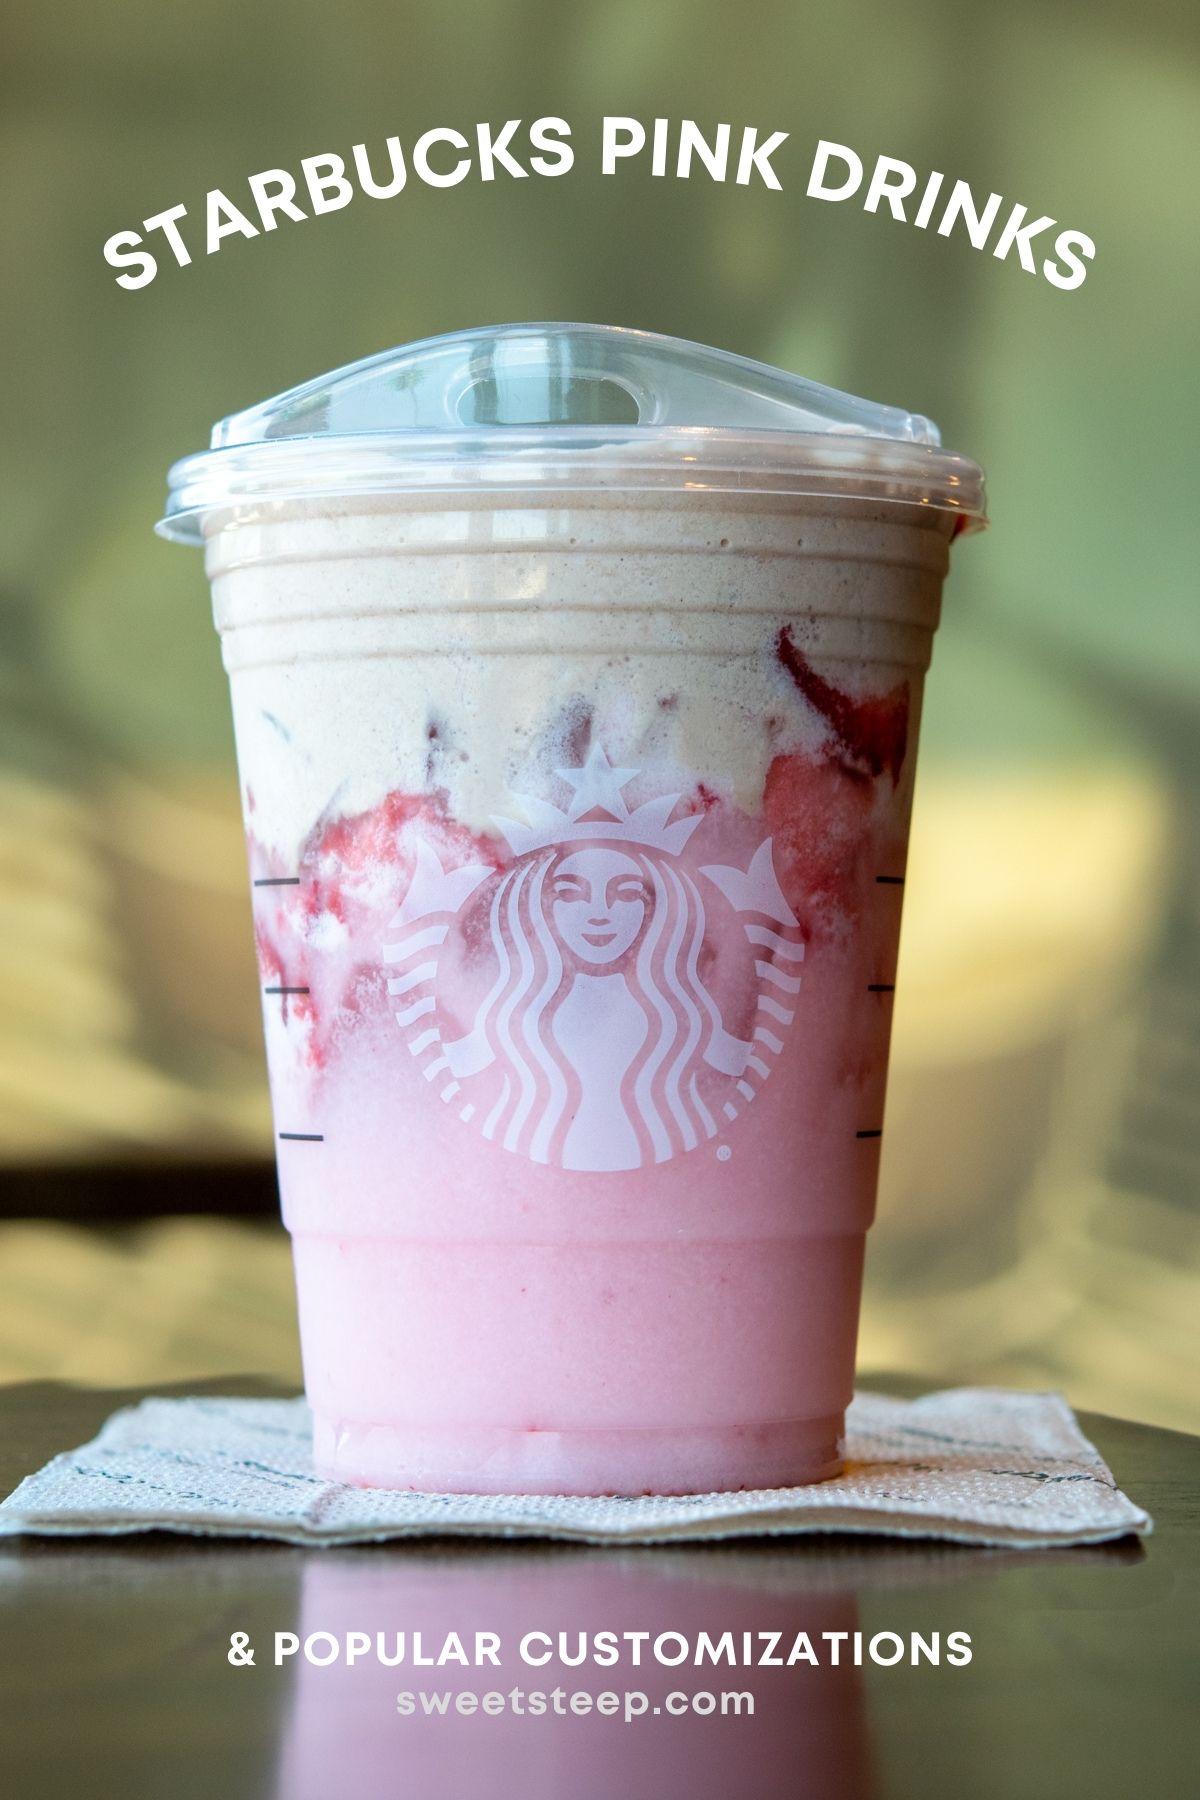 Tips for Ordering Starbucks Pink Drinks with customizations.